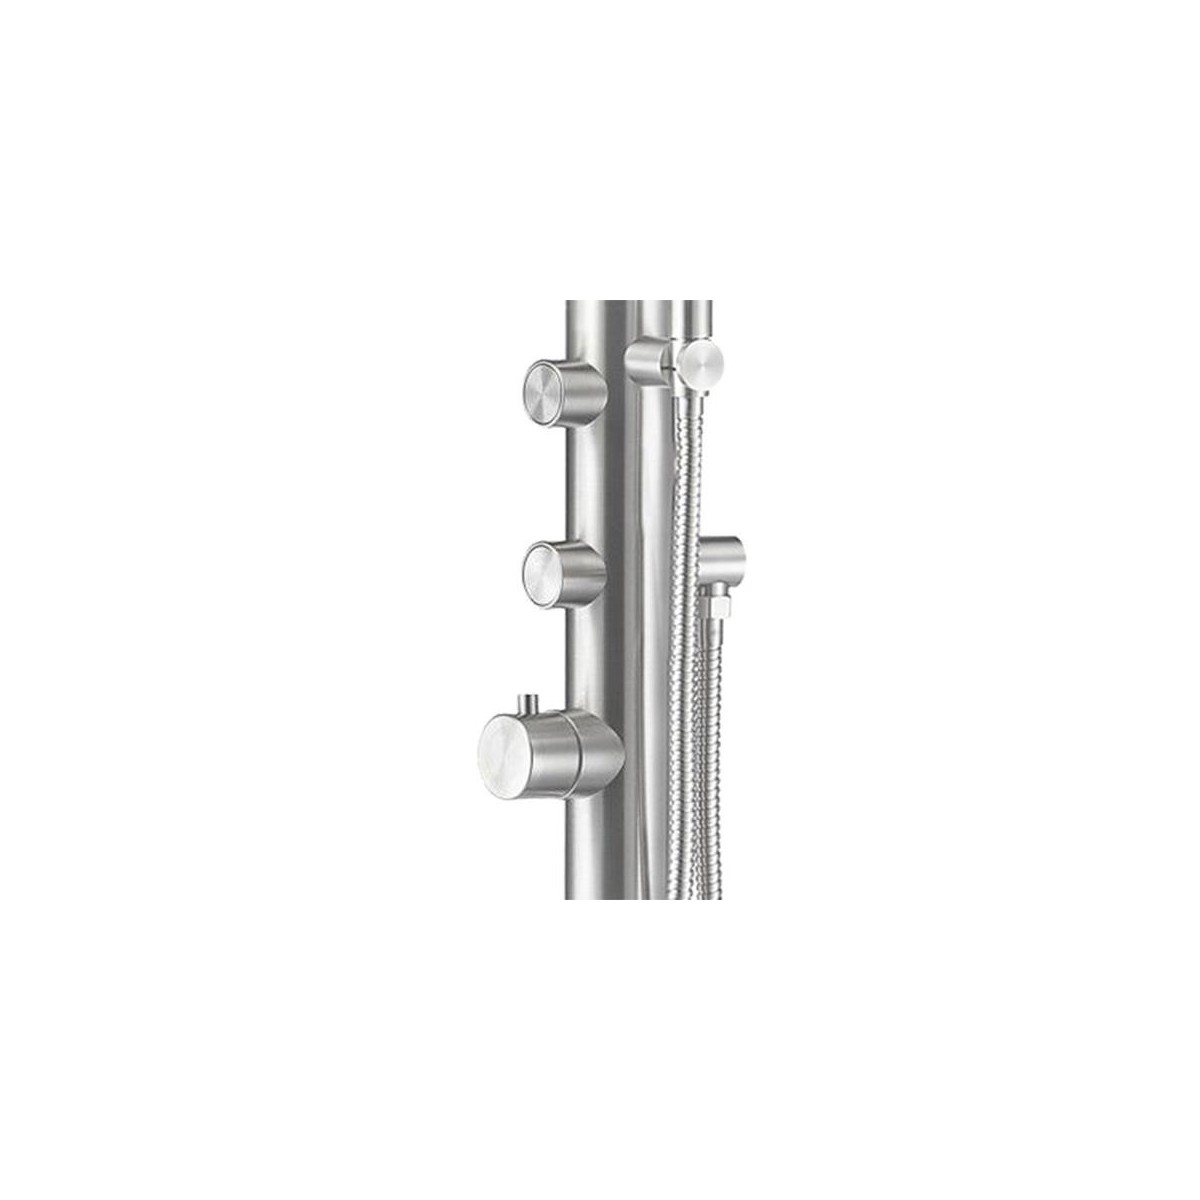 Buy Outdoor shower Budoni in satin stainless AISI 316 with mixer and hand shower